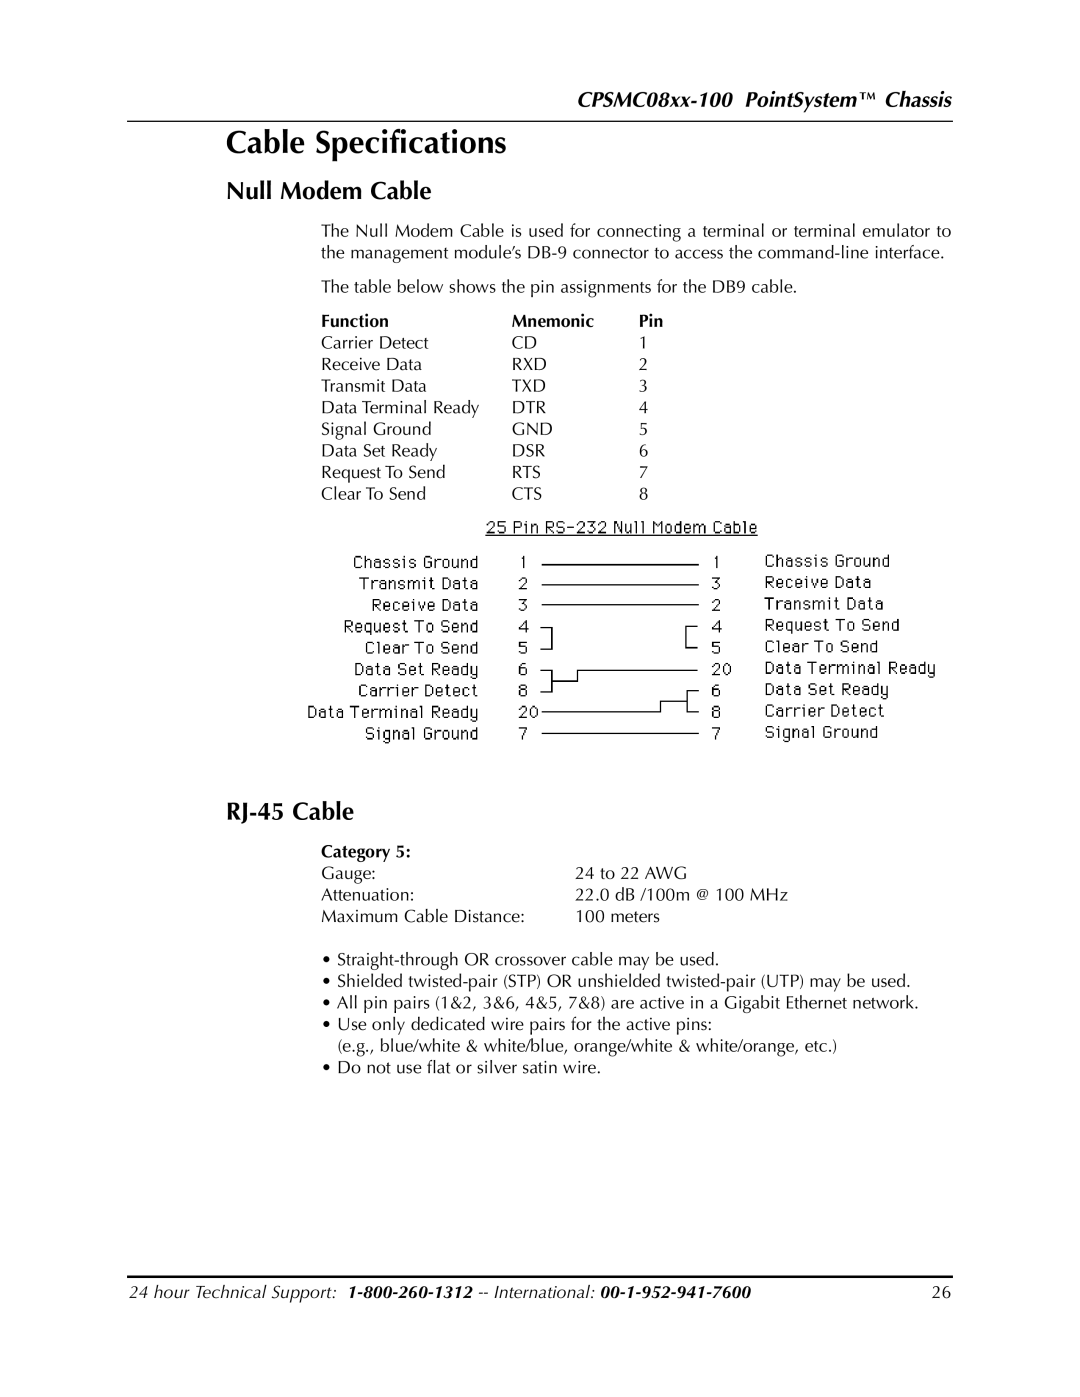 Transition Networks CPSMC0800-100 Cable Specifications, Null Modem Cable, RJ-45 Cable, CPSMC08xx-100 PointSystem Chassis 